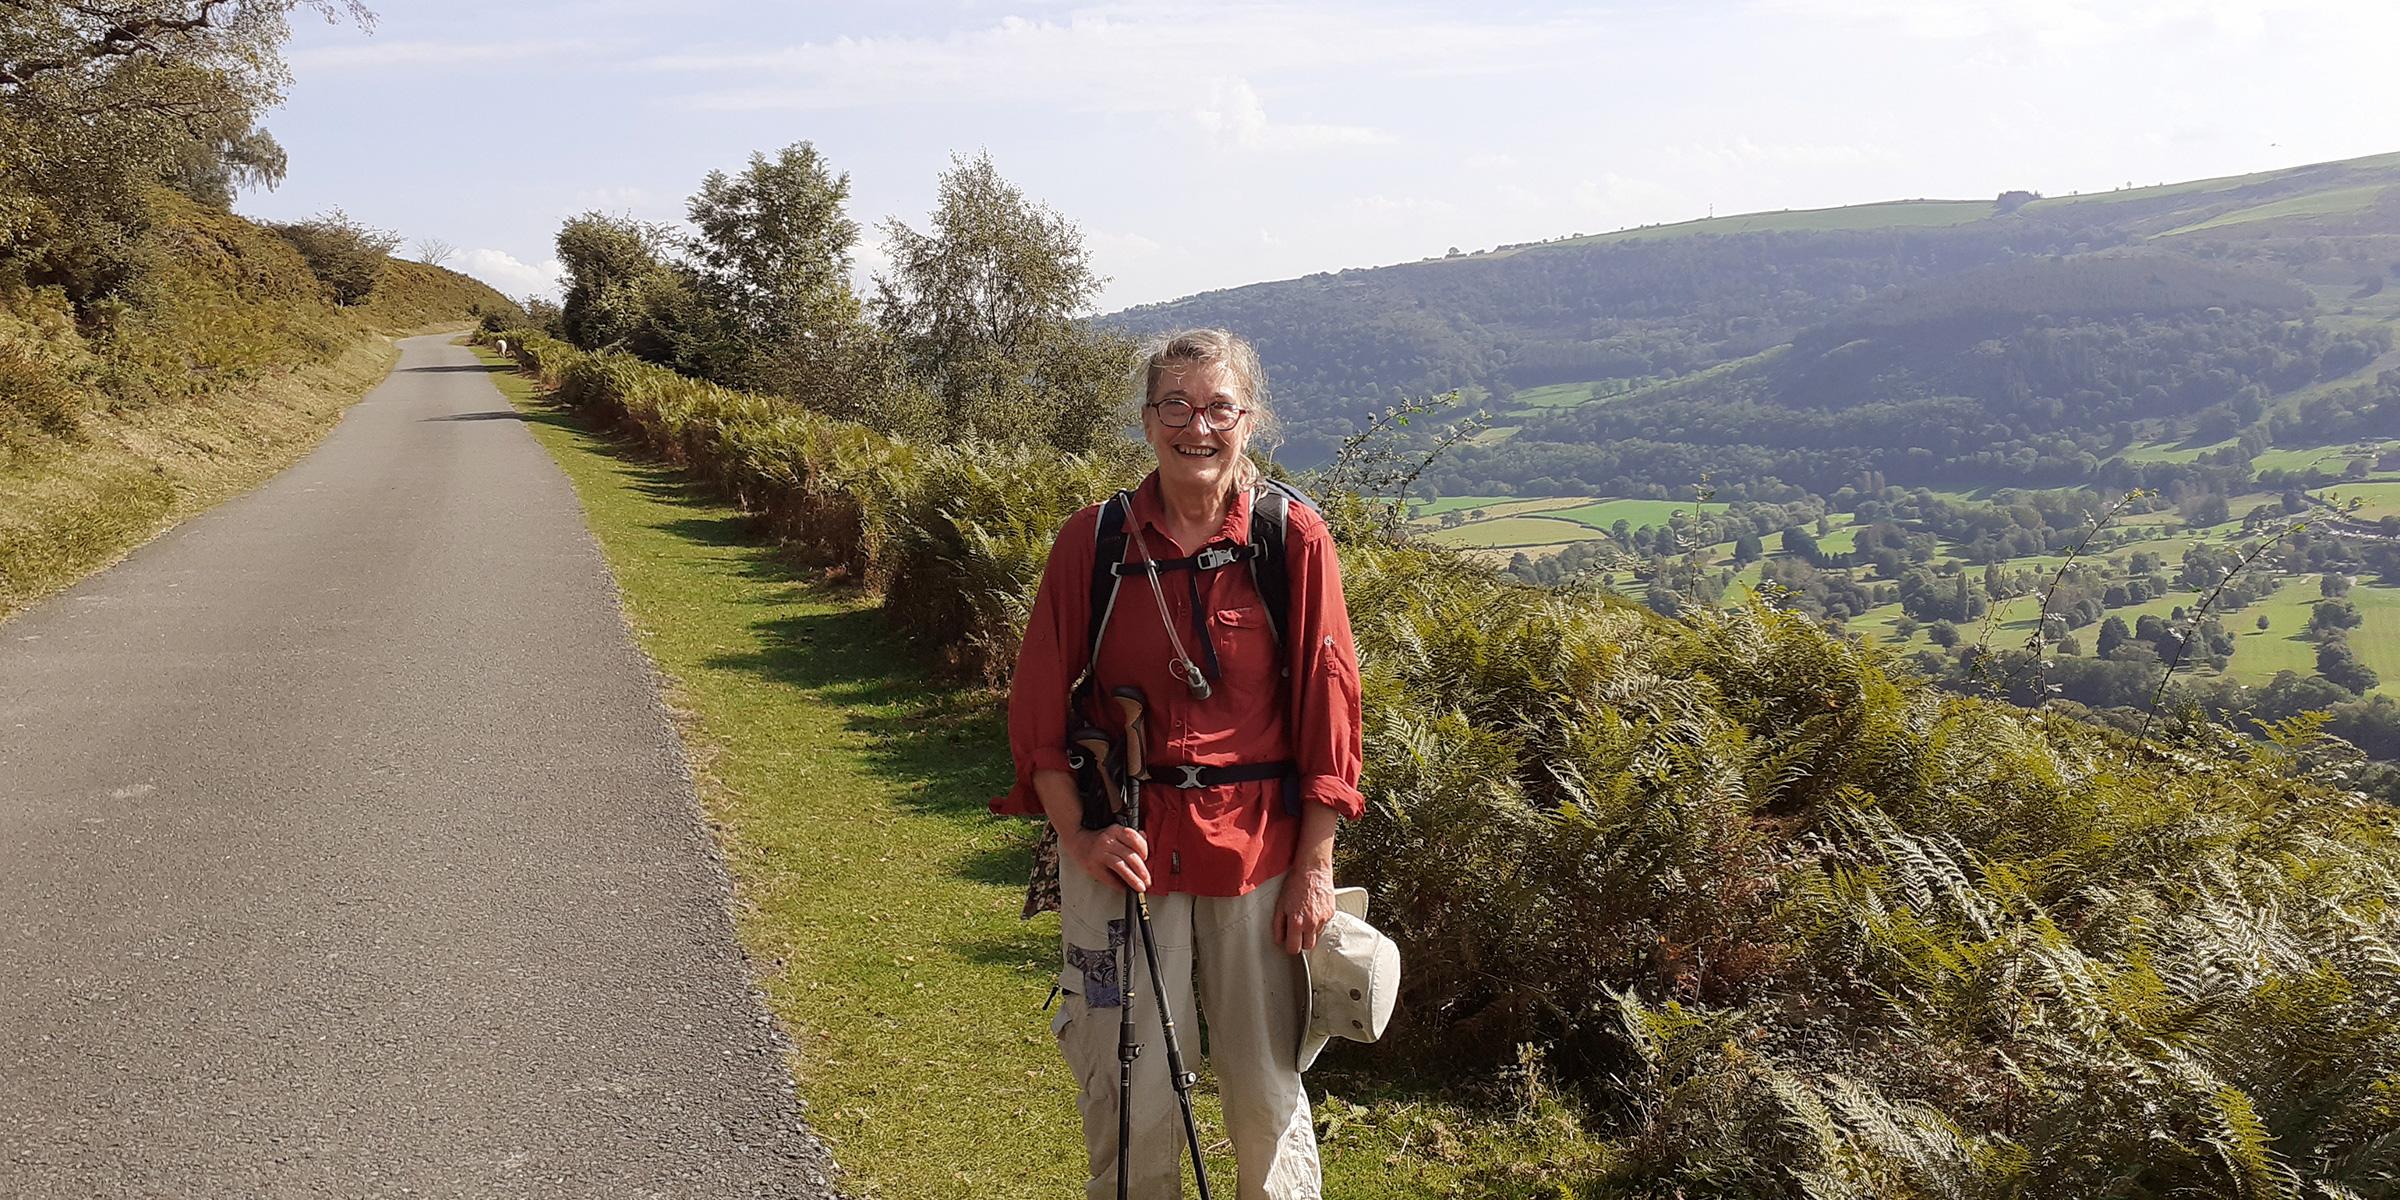 Jane Buckels stands along a road in front of a hilly area during her Offa's Dyke Path walk. She has a hat and walking stick and is wearing beige trousers and a red jumper